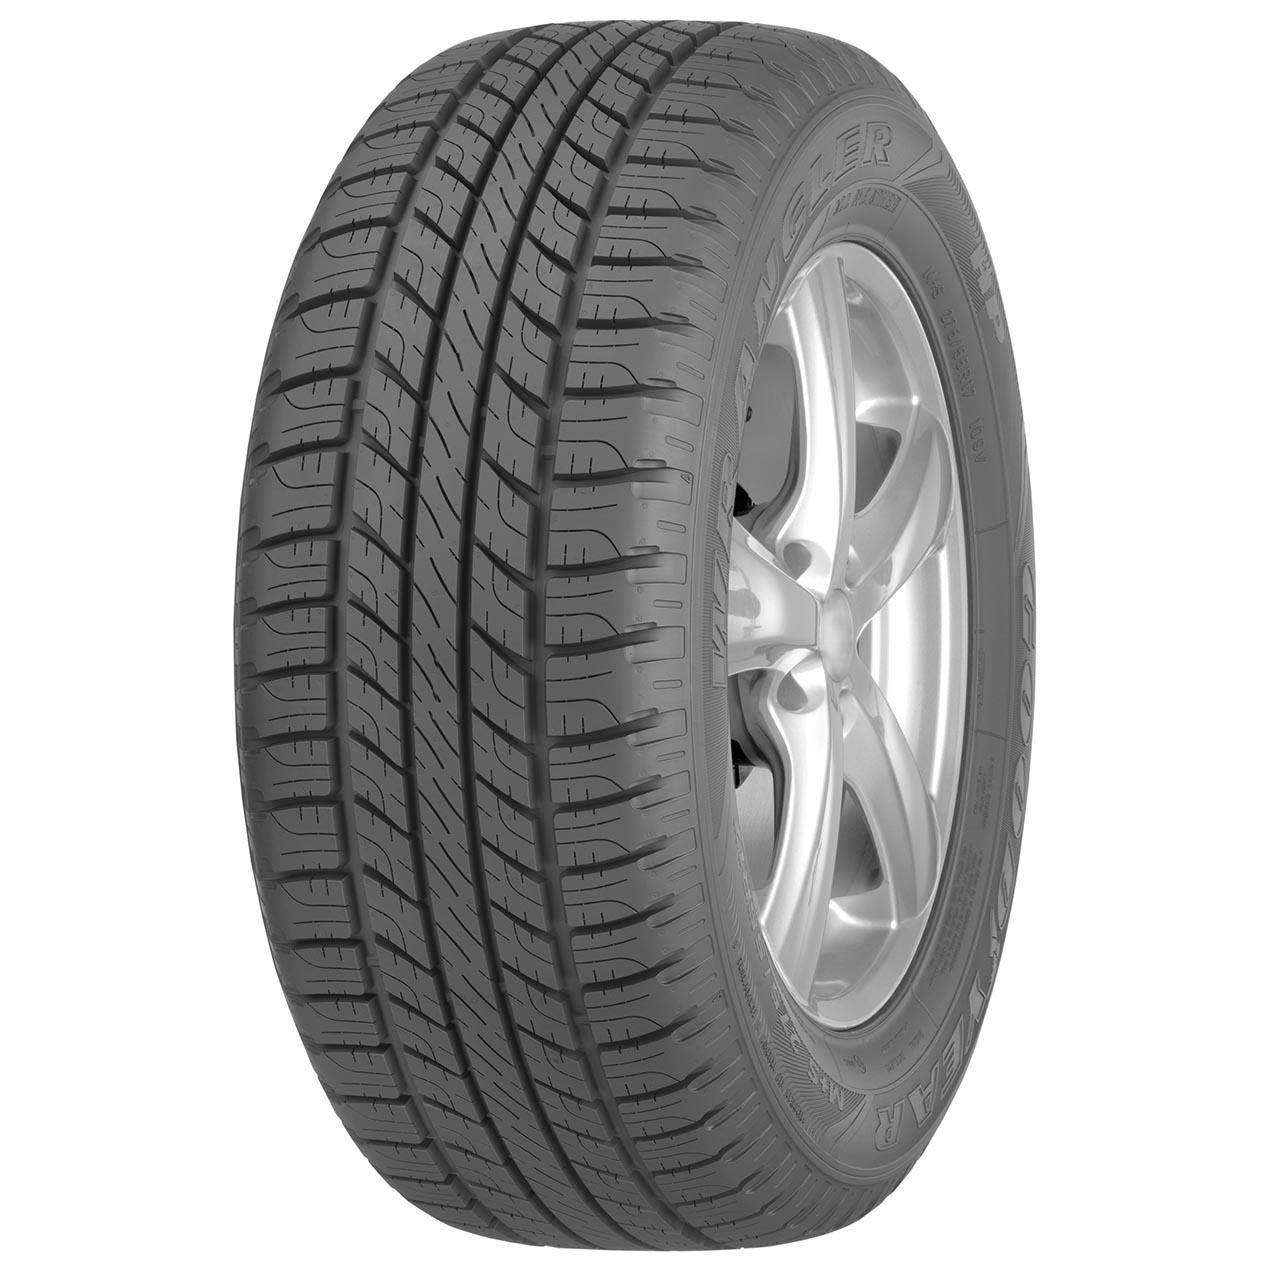 GOODYEAR WRANGLER HP ALL WEATHER FP 245/70 R16 107H  TL M+S